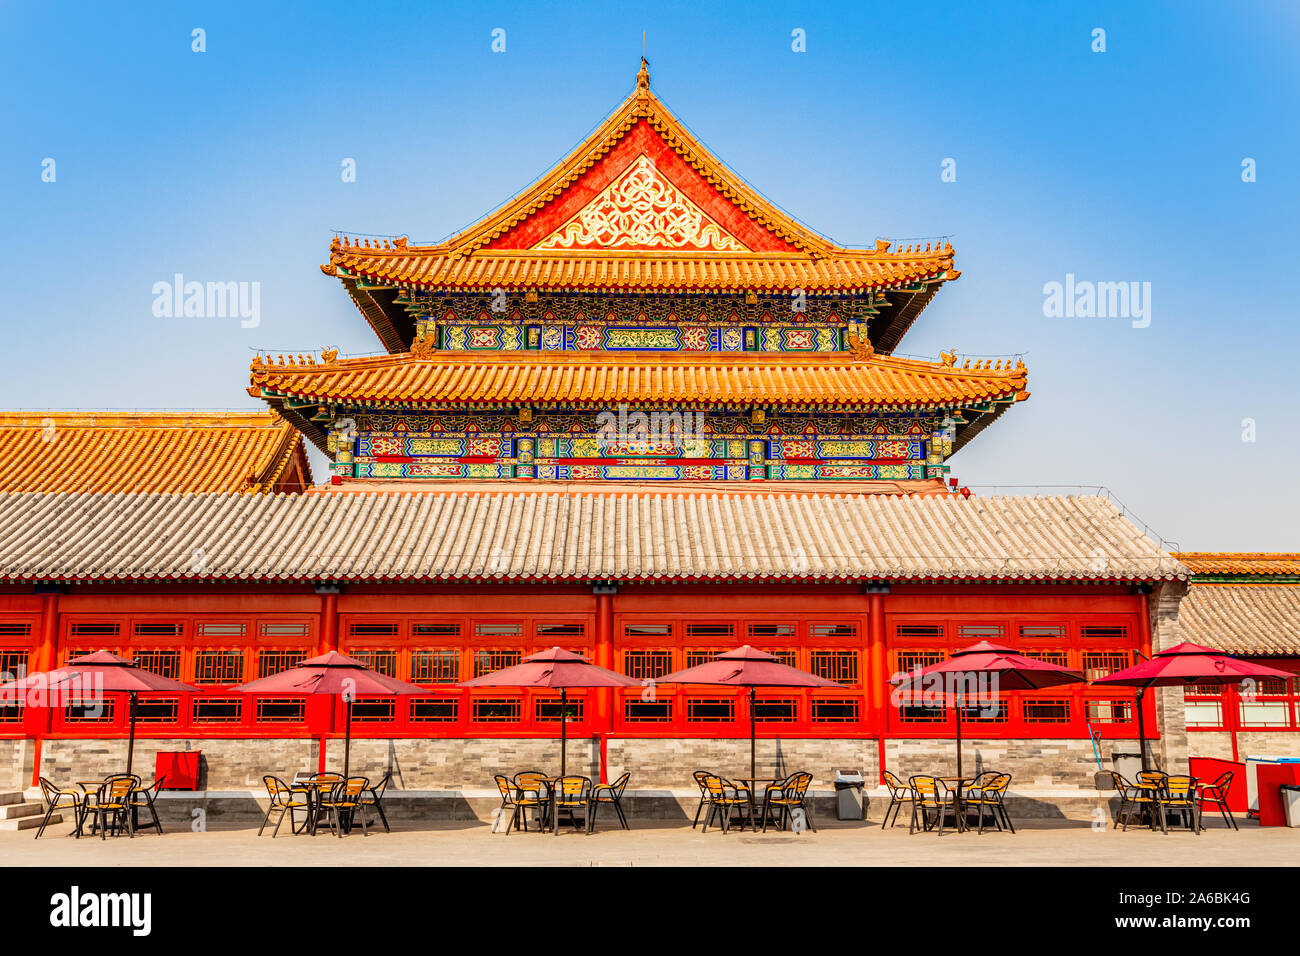 Summer cafe with tables and umbrellas at the wall of one of the royal emperor palace in Forbidden city, Beijing, China Stock Photo